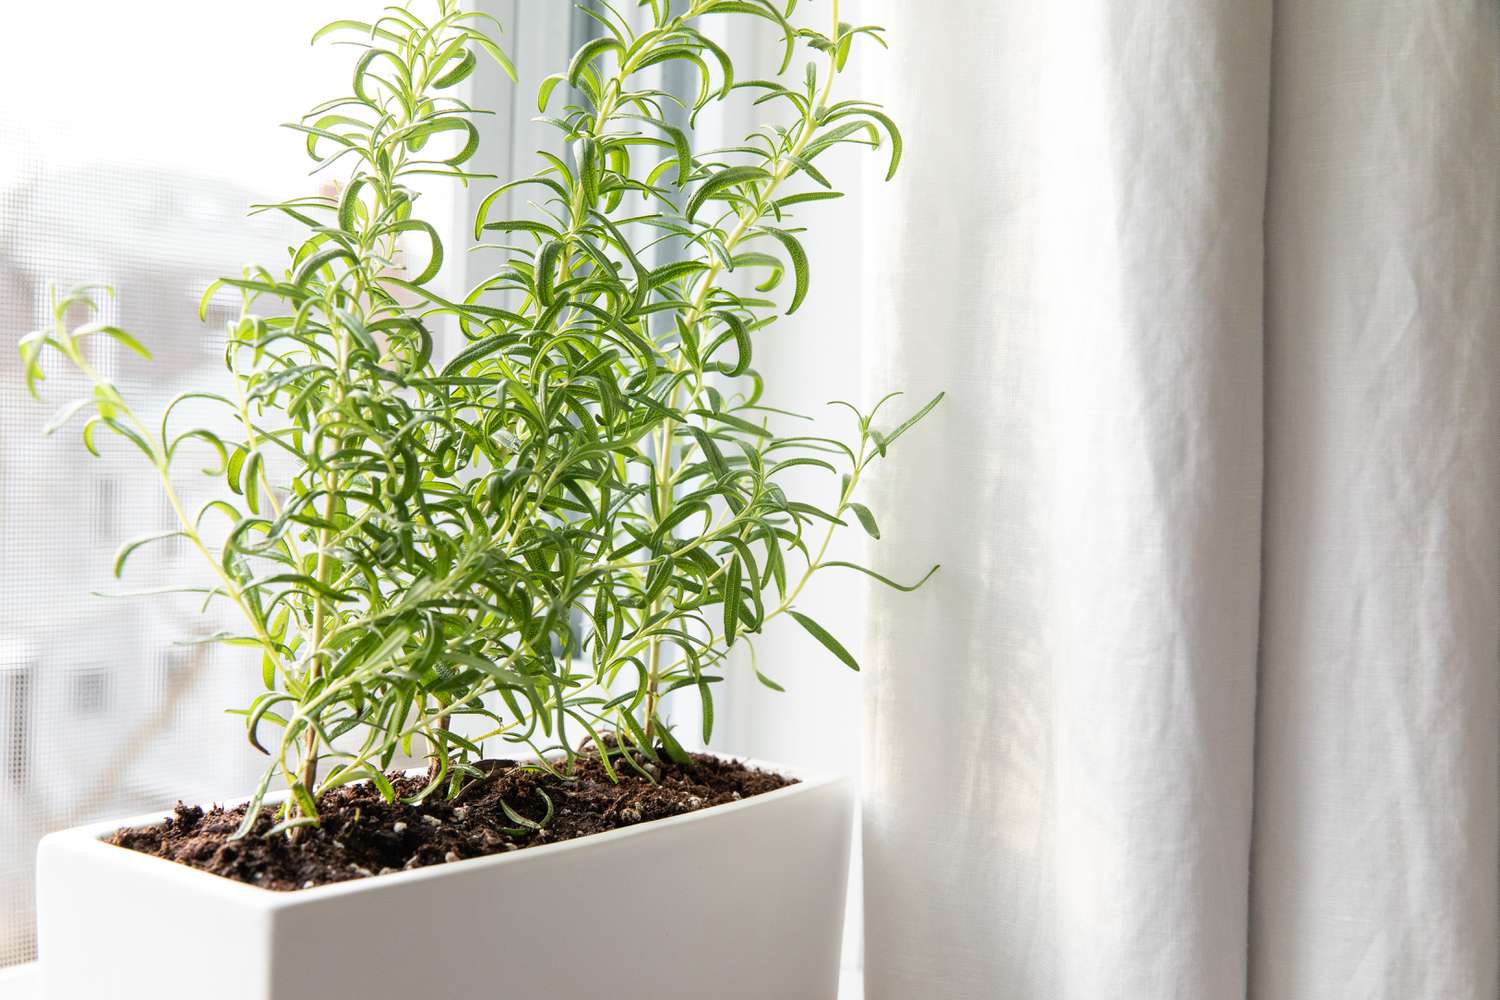 How To Care For Rosemary Plant Indoors